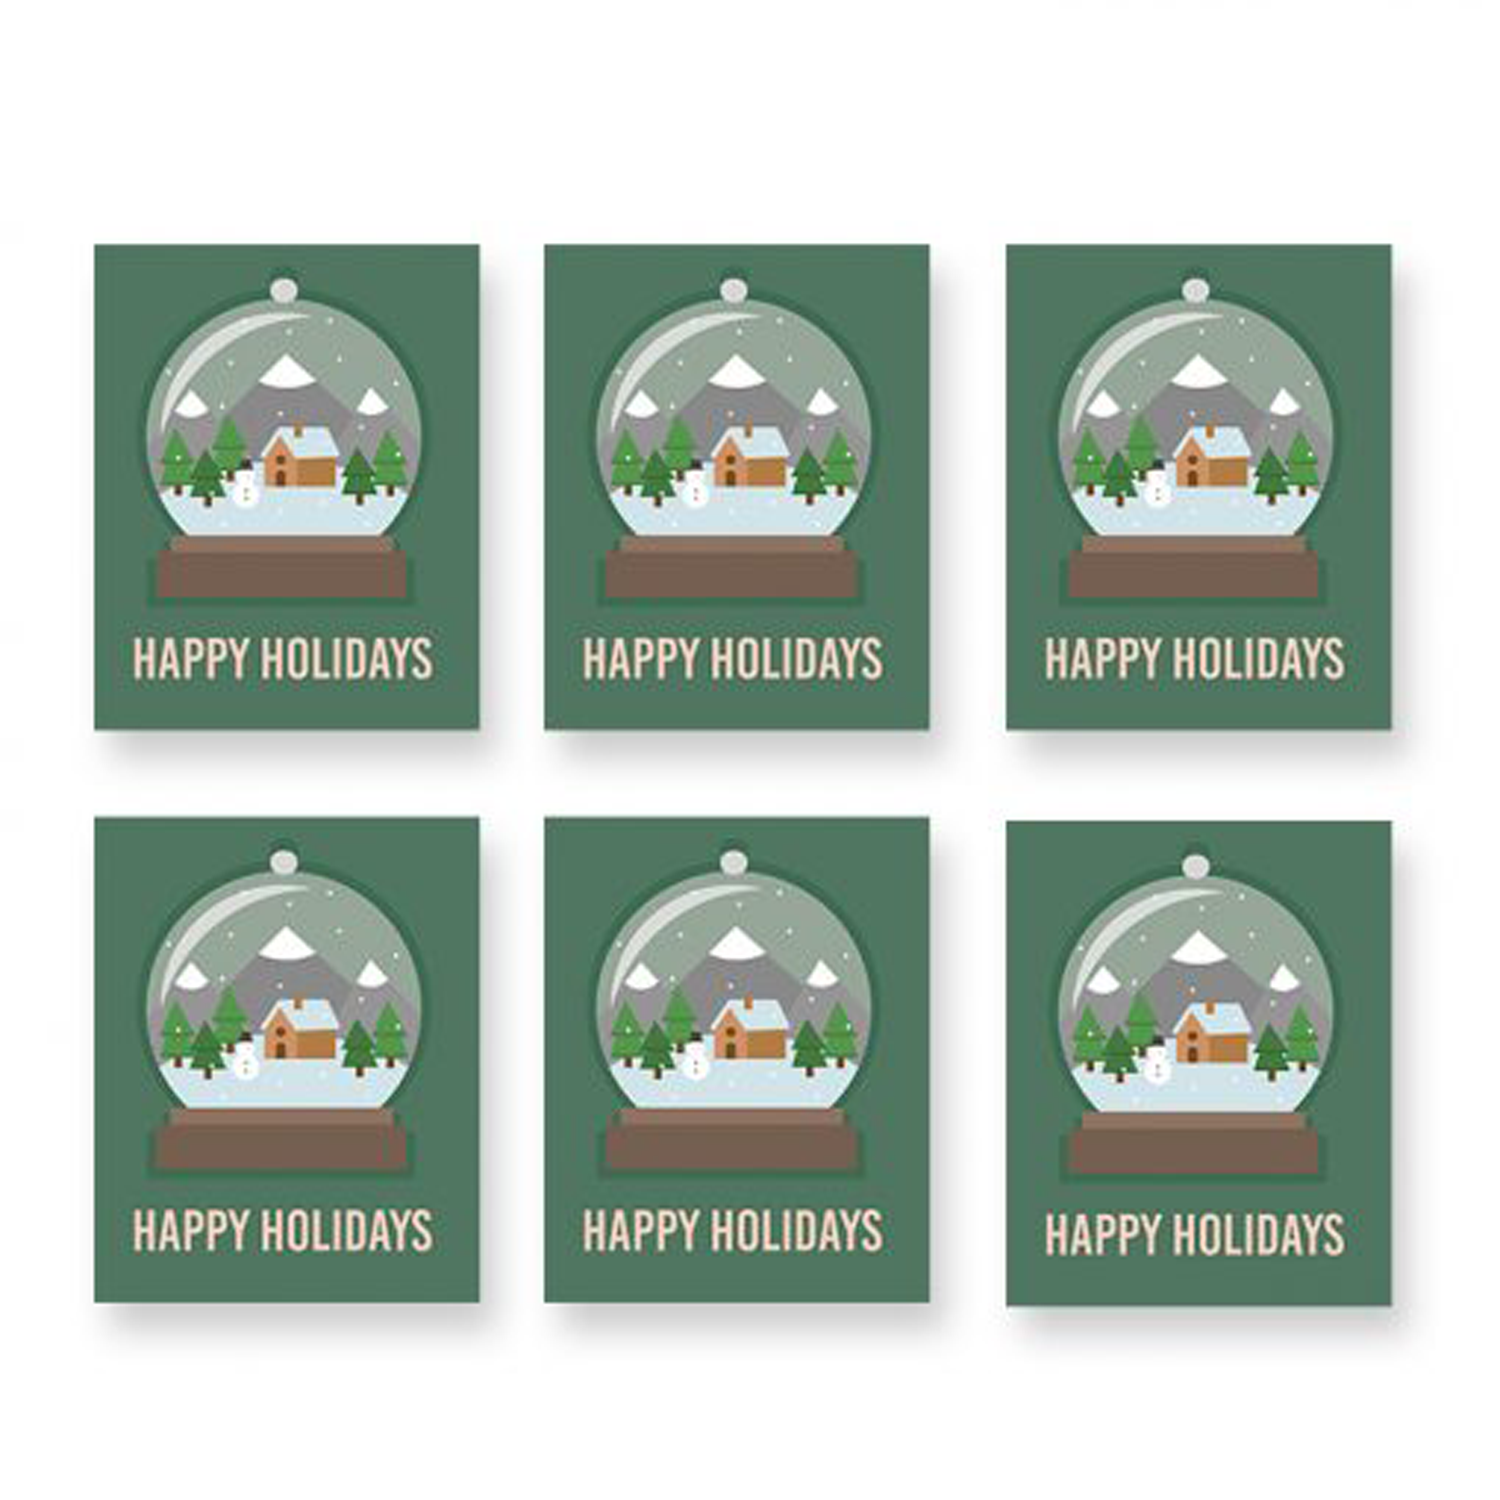 IMPAPER: Snowglobe Xmas Card Product Image 1 of 1